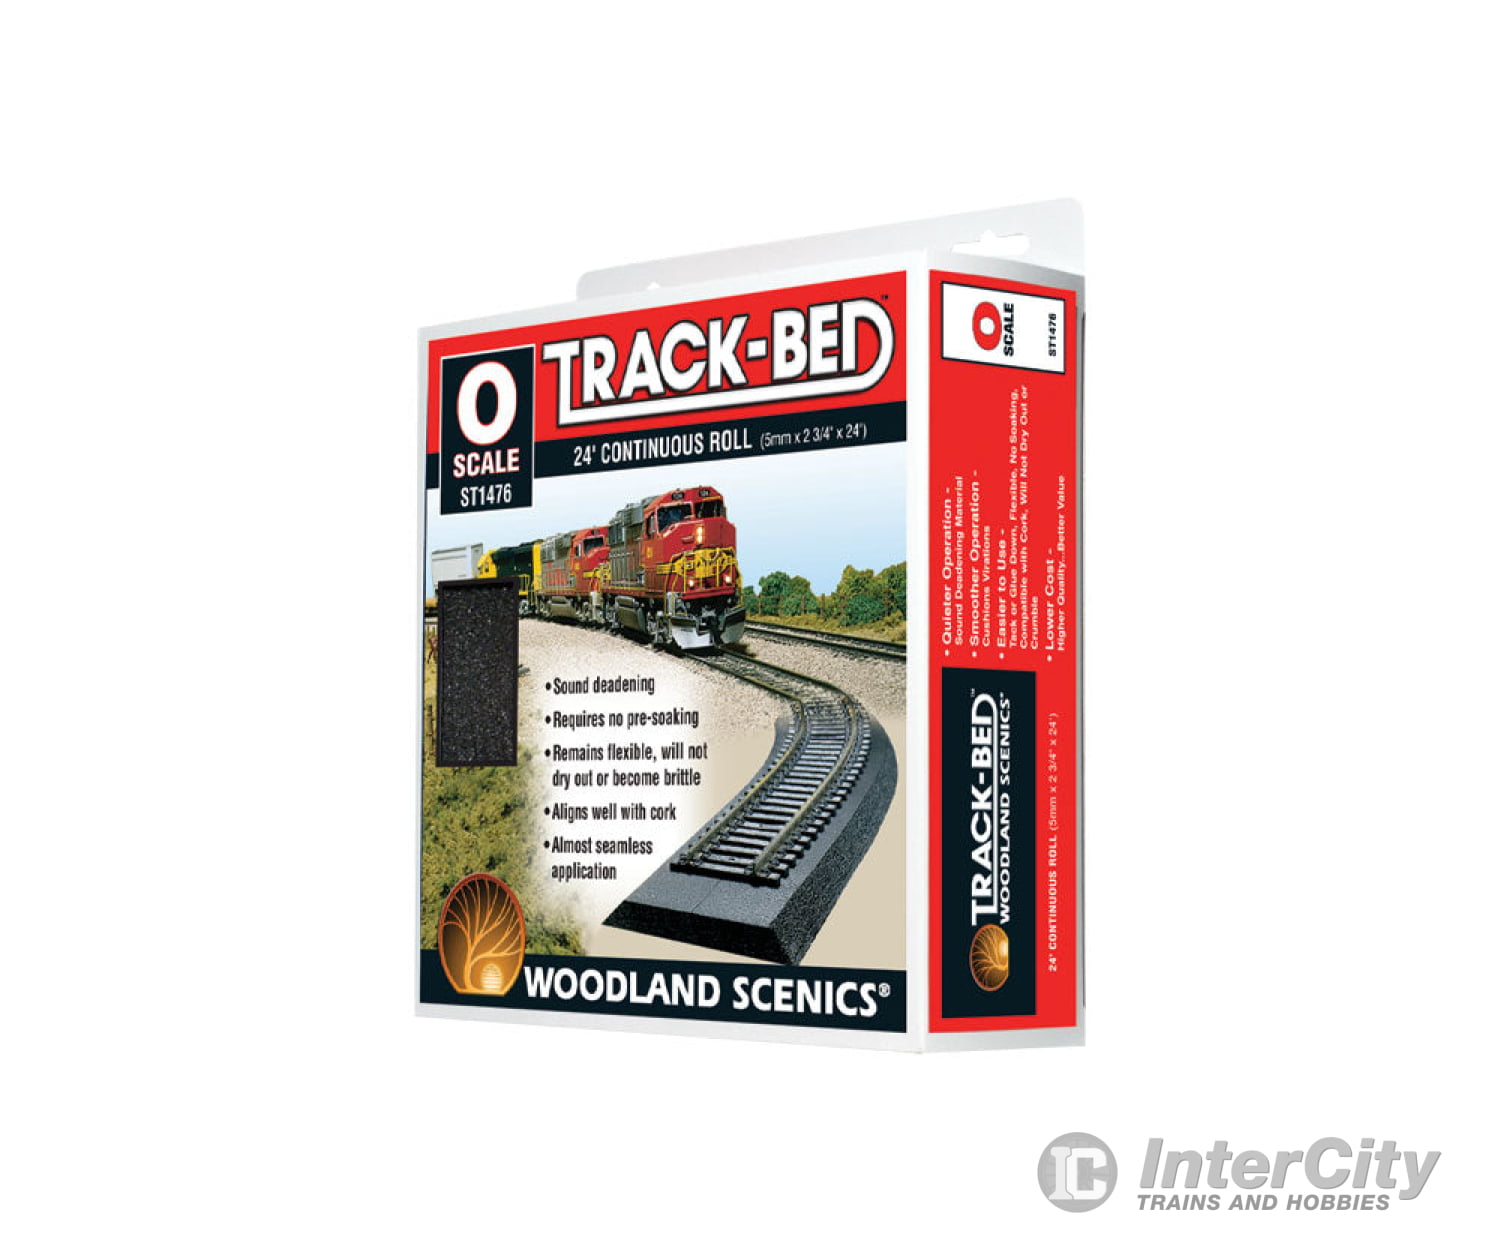 Woodland Scenics 1476 Track - Bed Roadbed Material Continuous Roll - 24’ 7.3M O Scale Ballast &